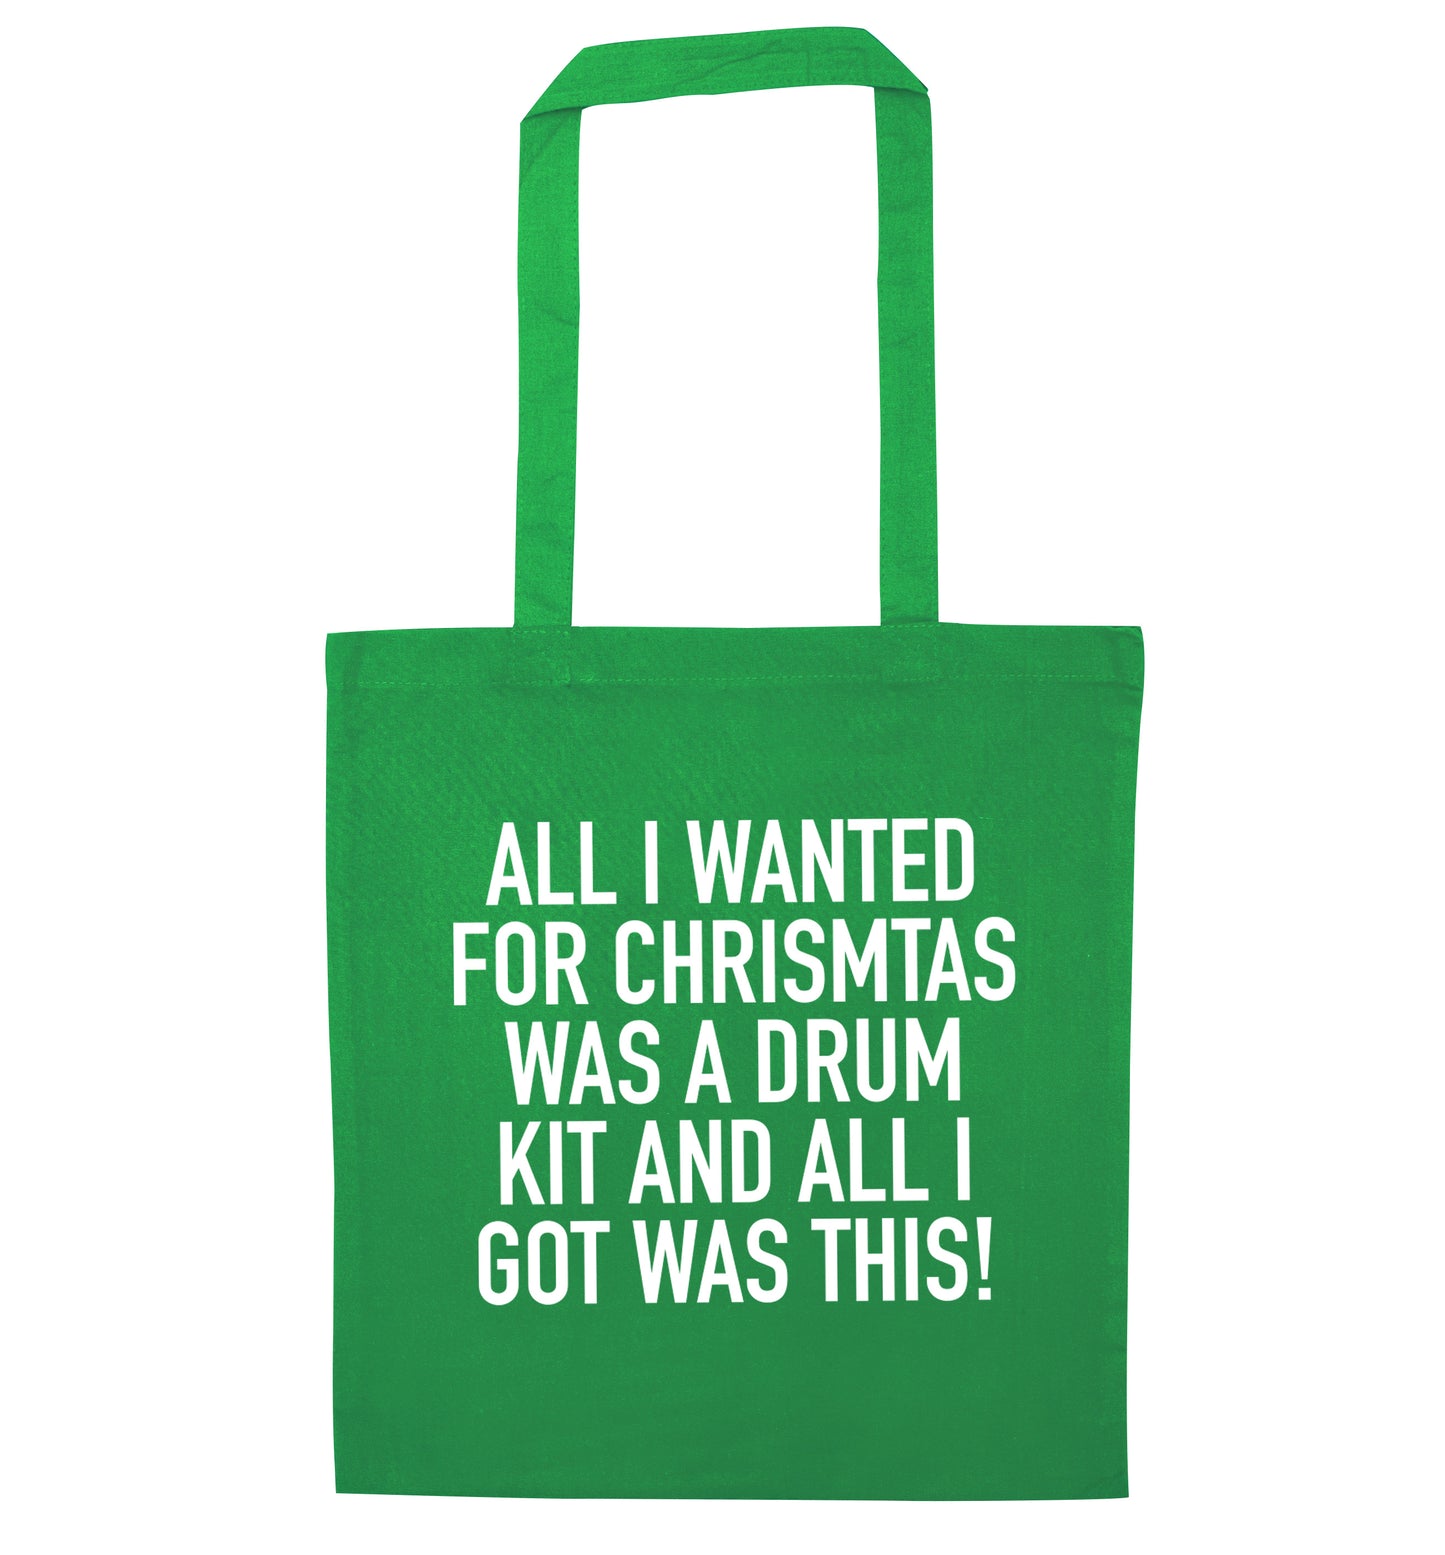 All I wanted for Christmas was a drum kit and all I got was this! green tote bag